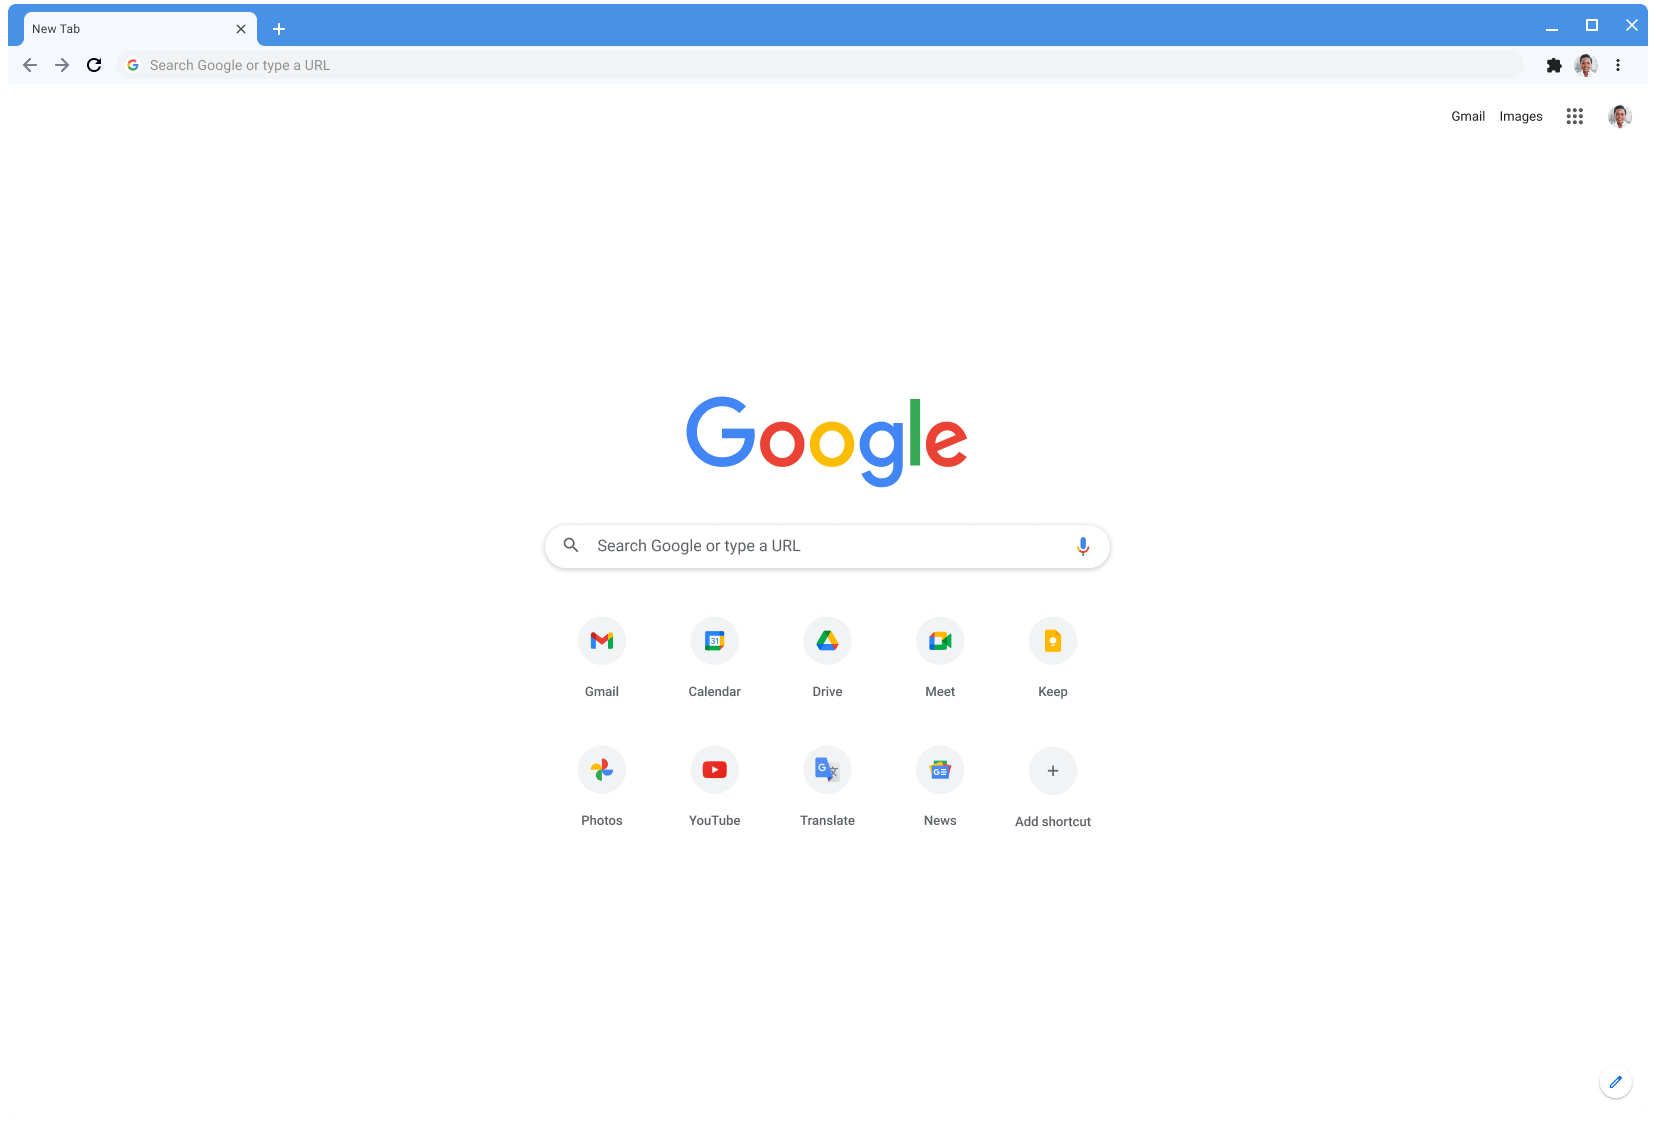 gmail is not opening in chrome